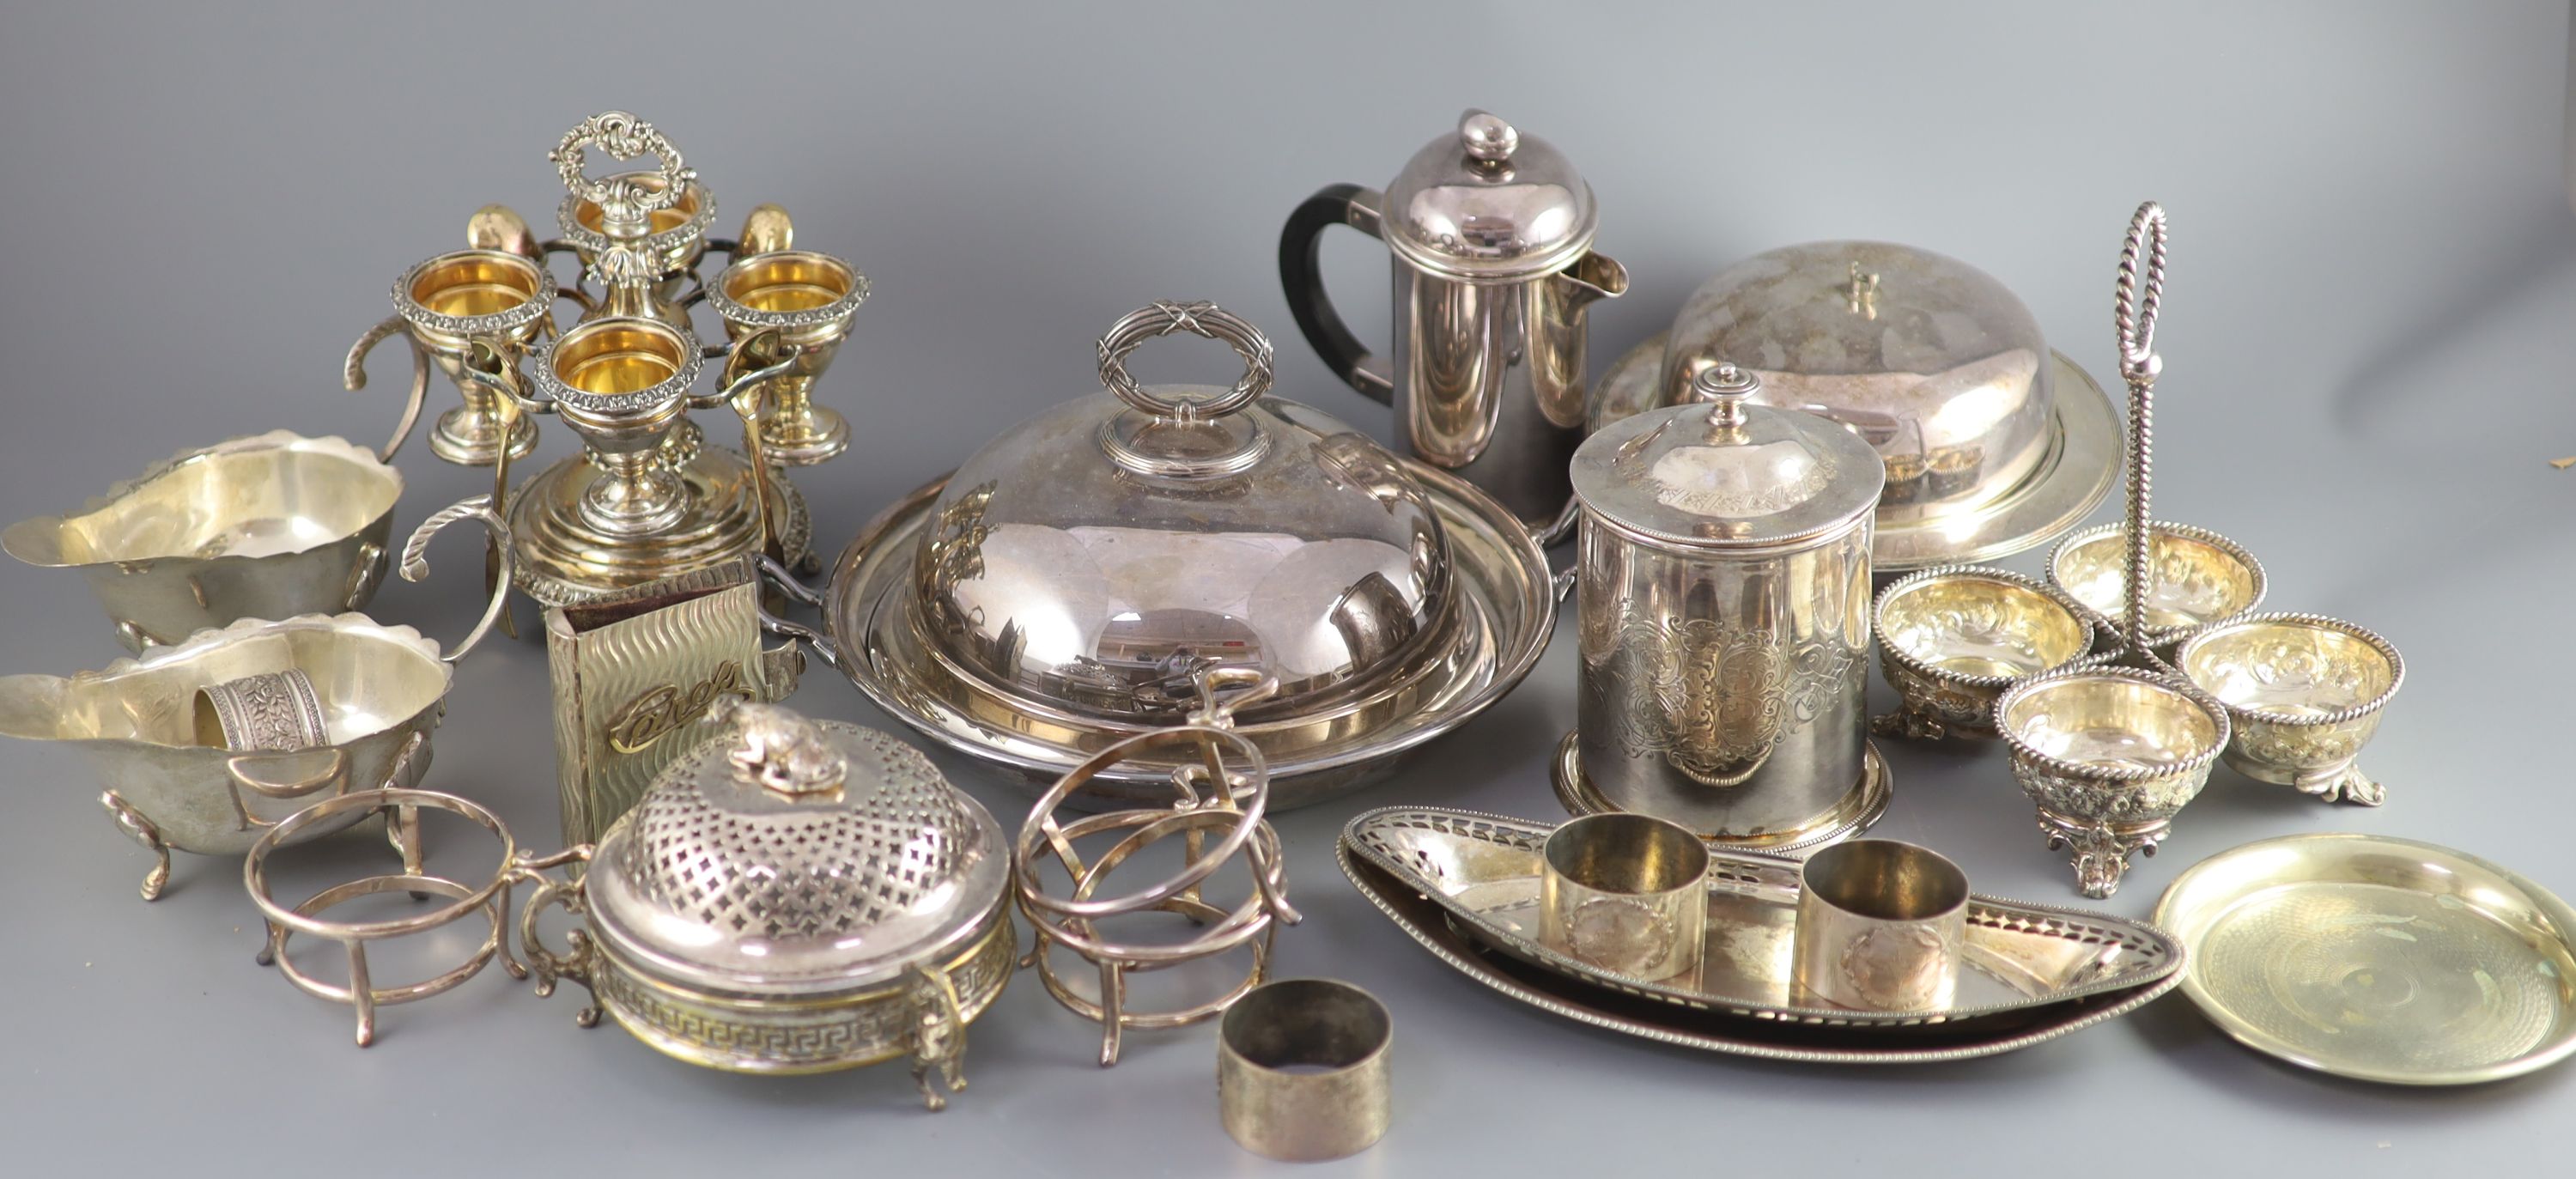 A silver plated egg cruet, a butter dish, a table salt and sundry other plated wares